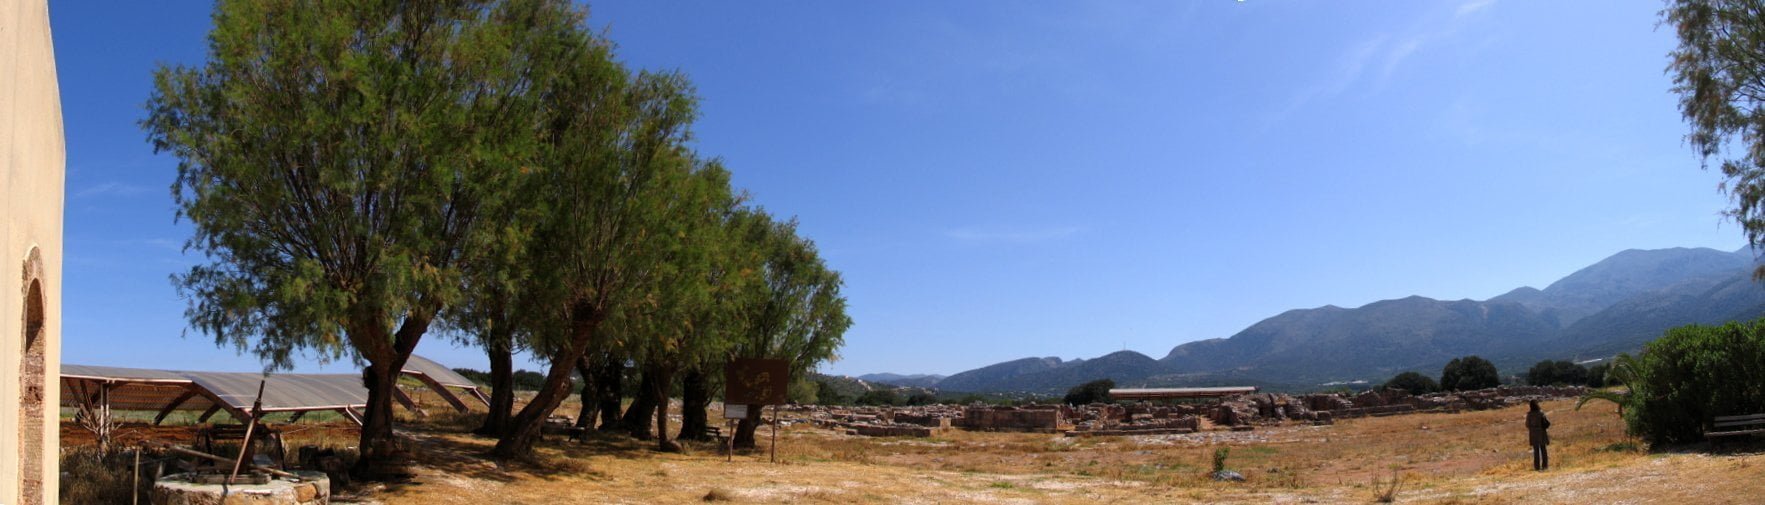 panoramic image of the entrance to the archaeological site of Malia Palace